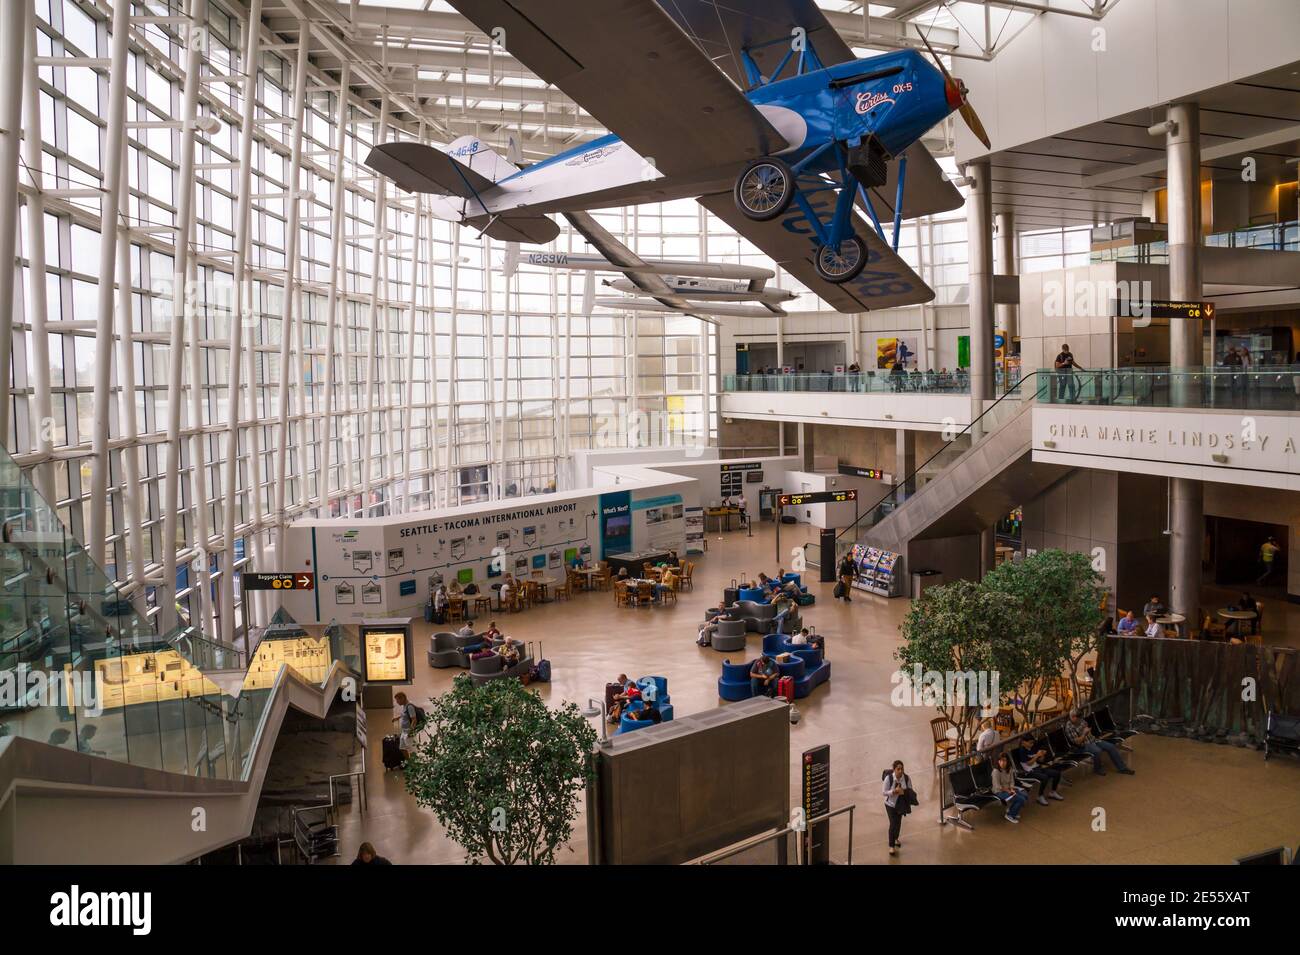 Seattletacoma International Airport Also Referred To As Seatac